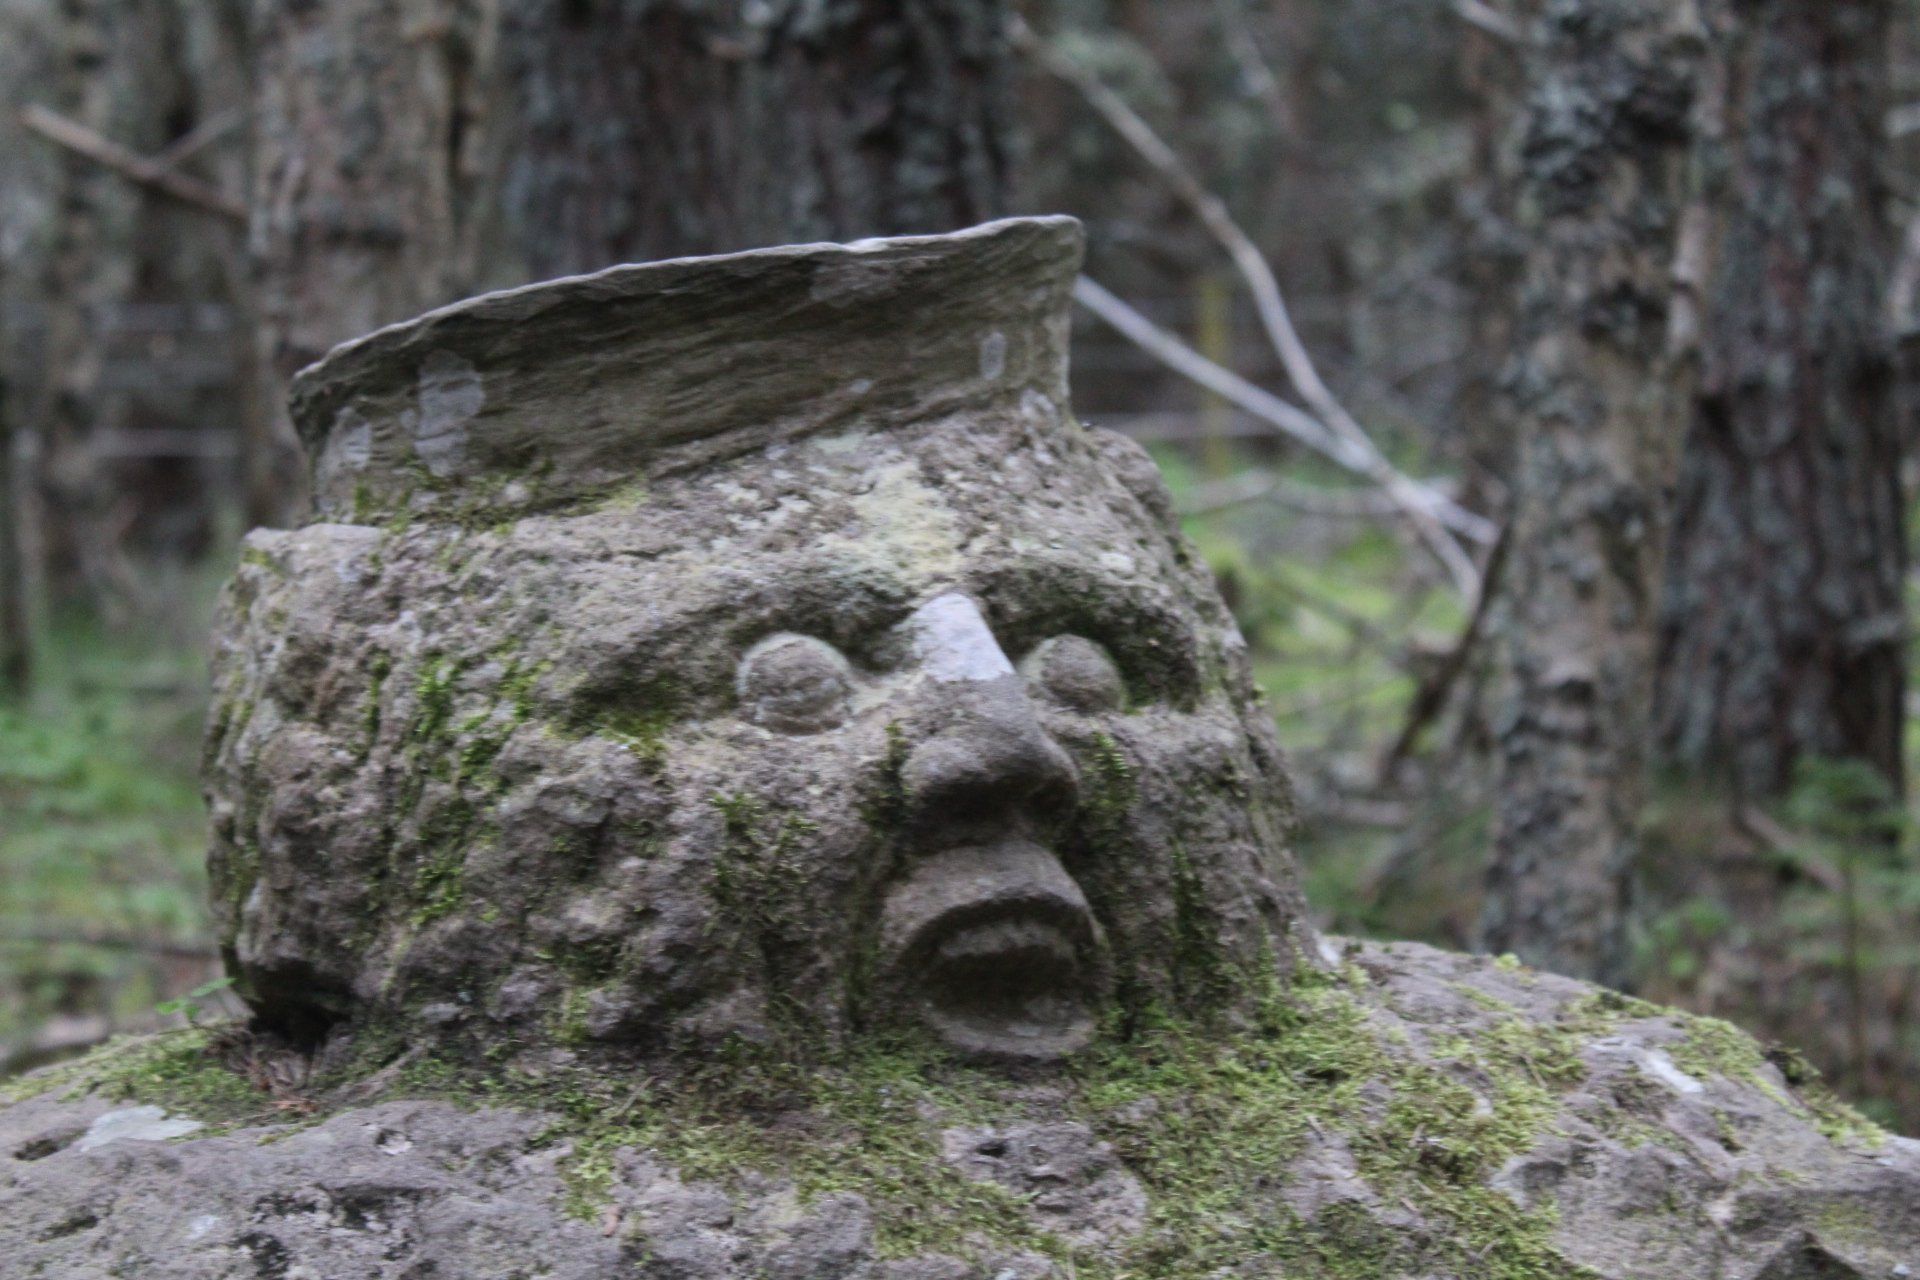 The Sailor is one of the few sculptures on the Frank Bruce Sculpture Trail captured forever in stone.